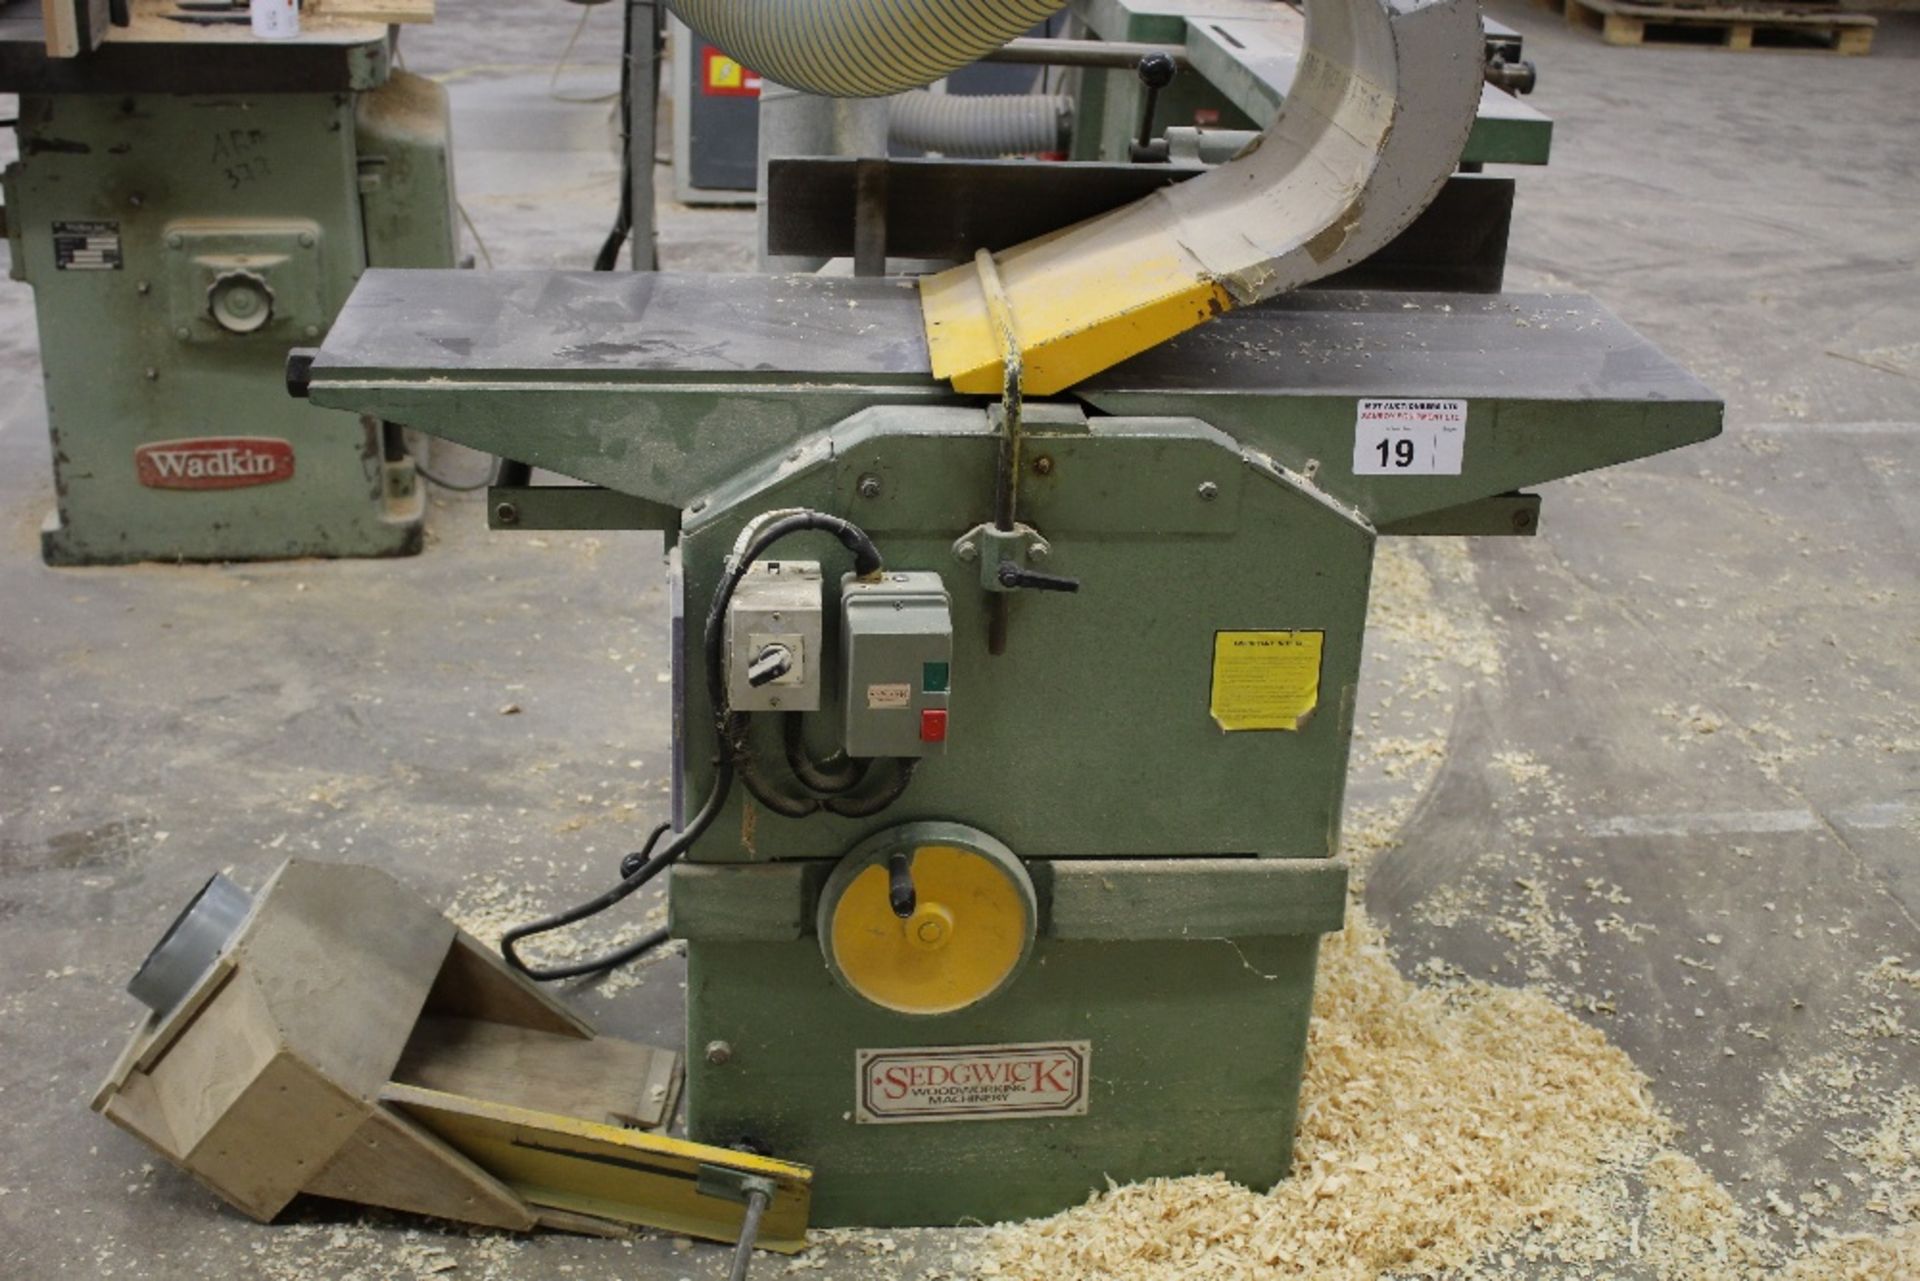 1 Sedgewick planer thicknesser model: Combination 12 inch x 8 inch, 3ph with extraction attachment